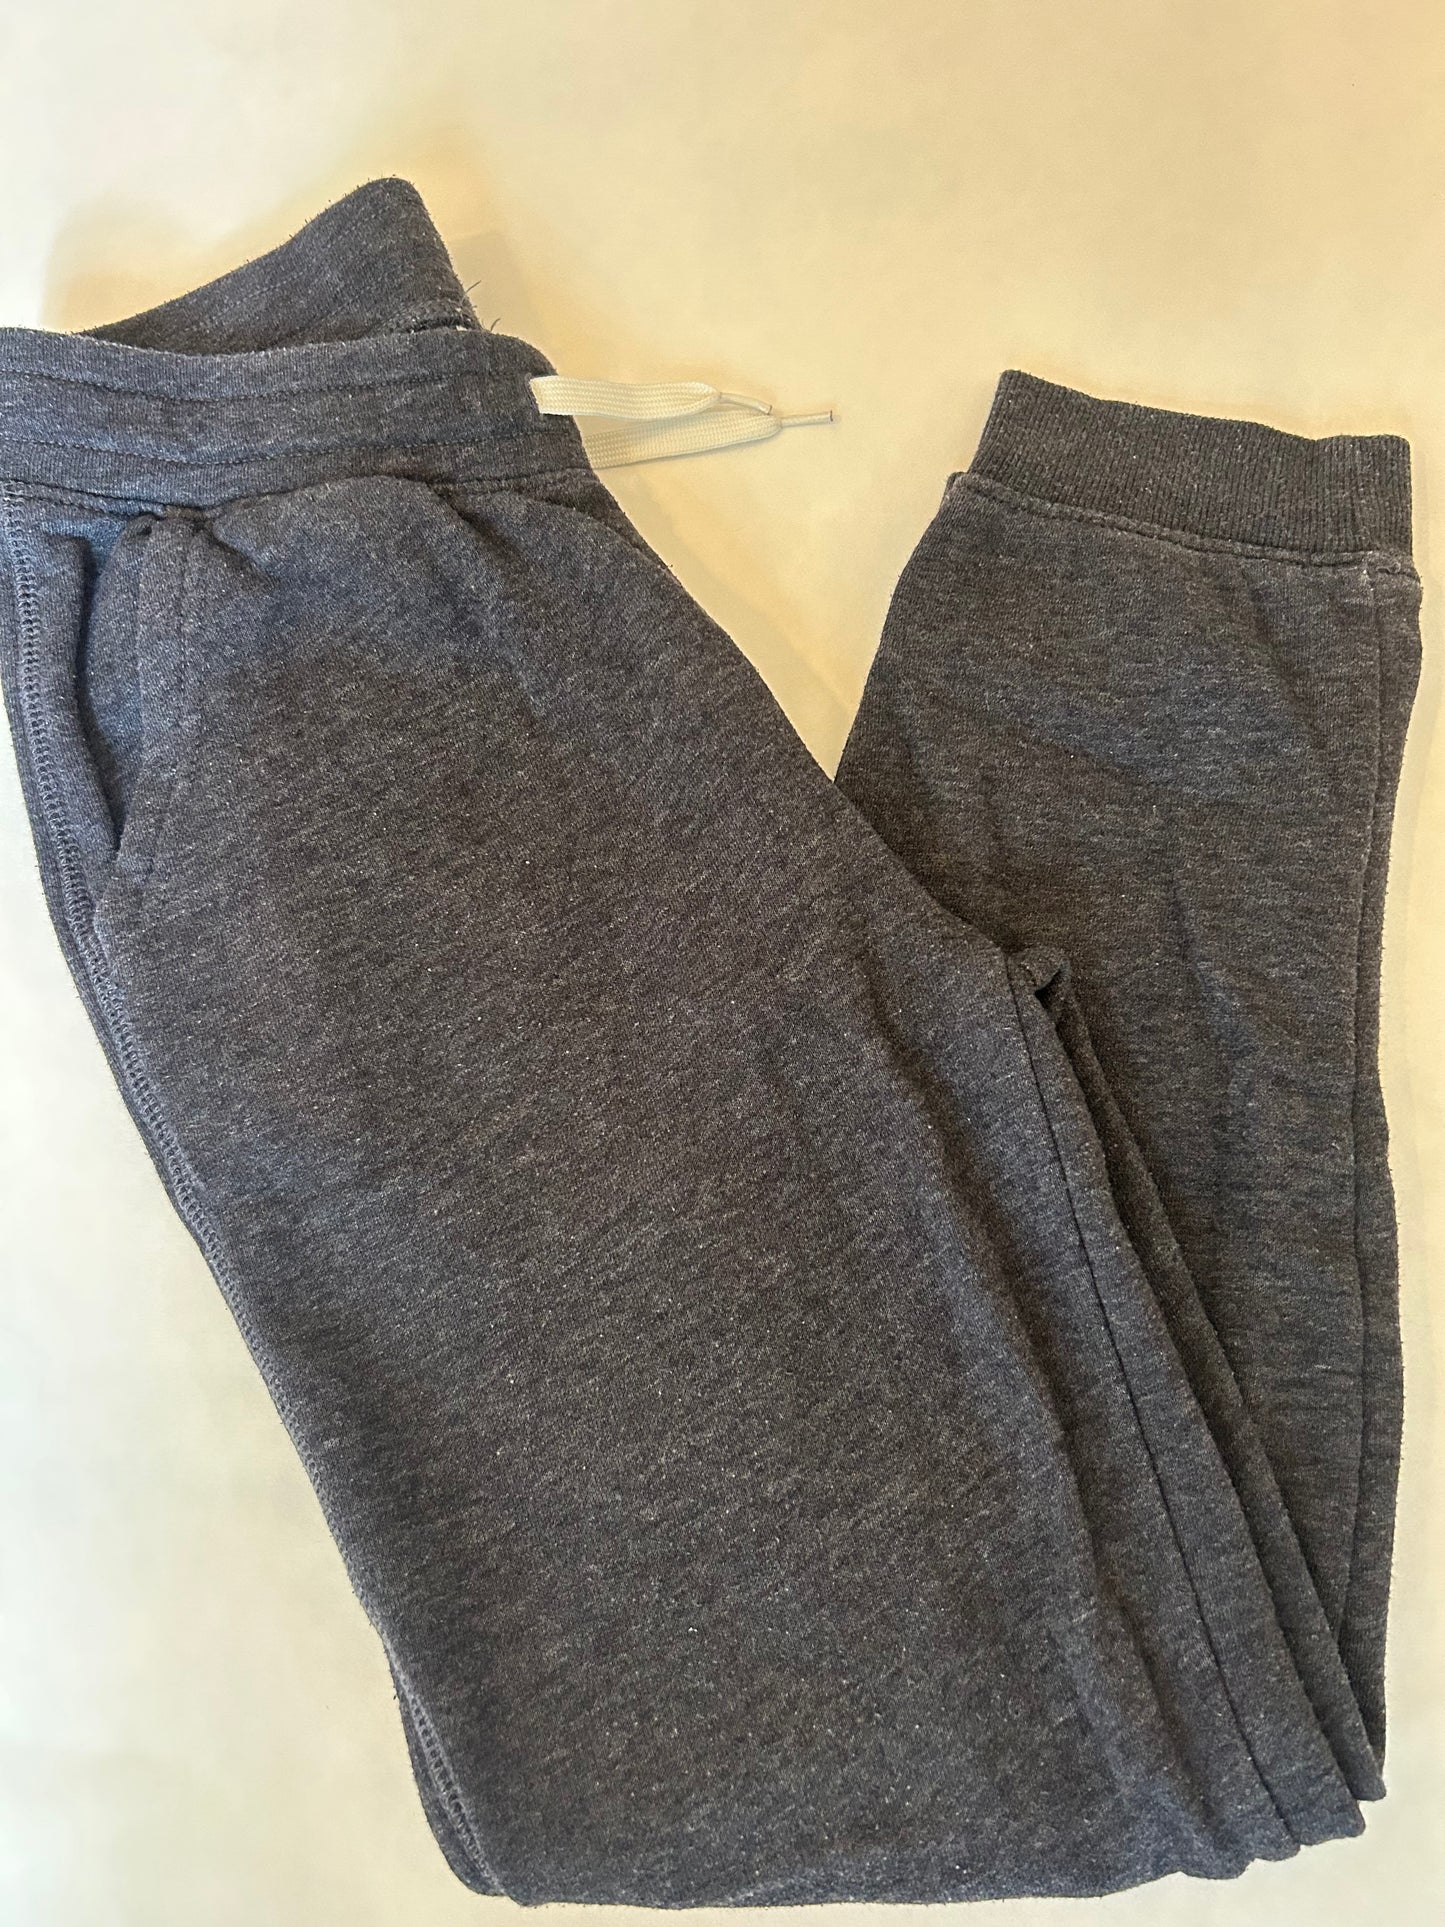 Boys Youth Large 10-12 Old Navy dark gray sweatpants with pockets